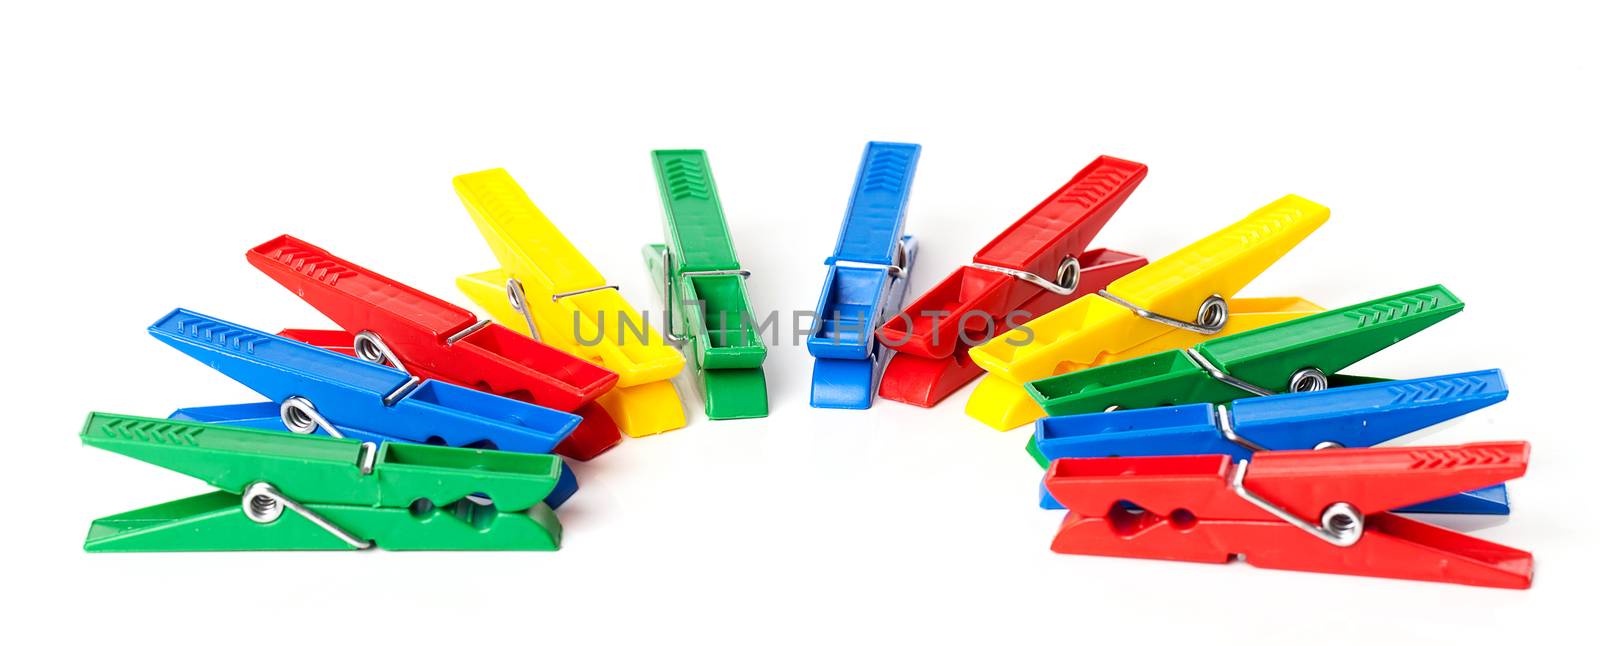 Closeup image of colorful clothespins isolated on a white background